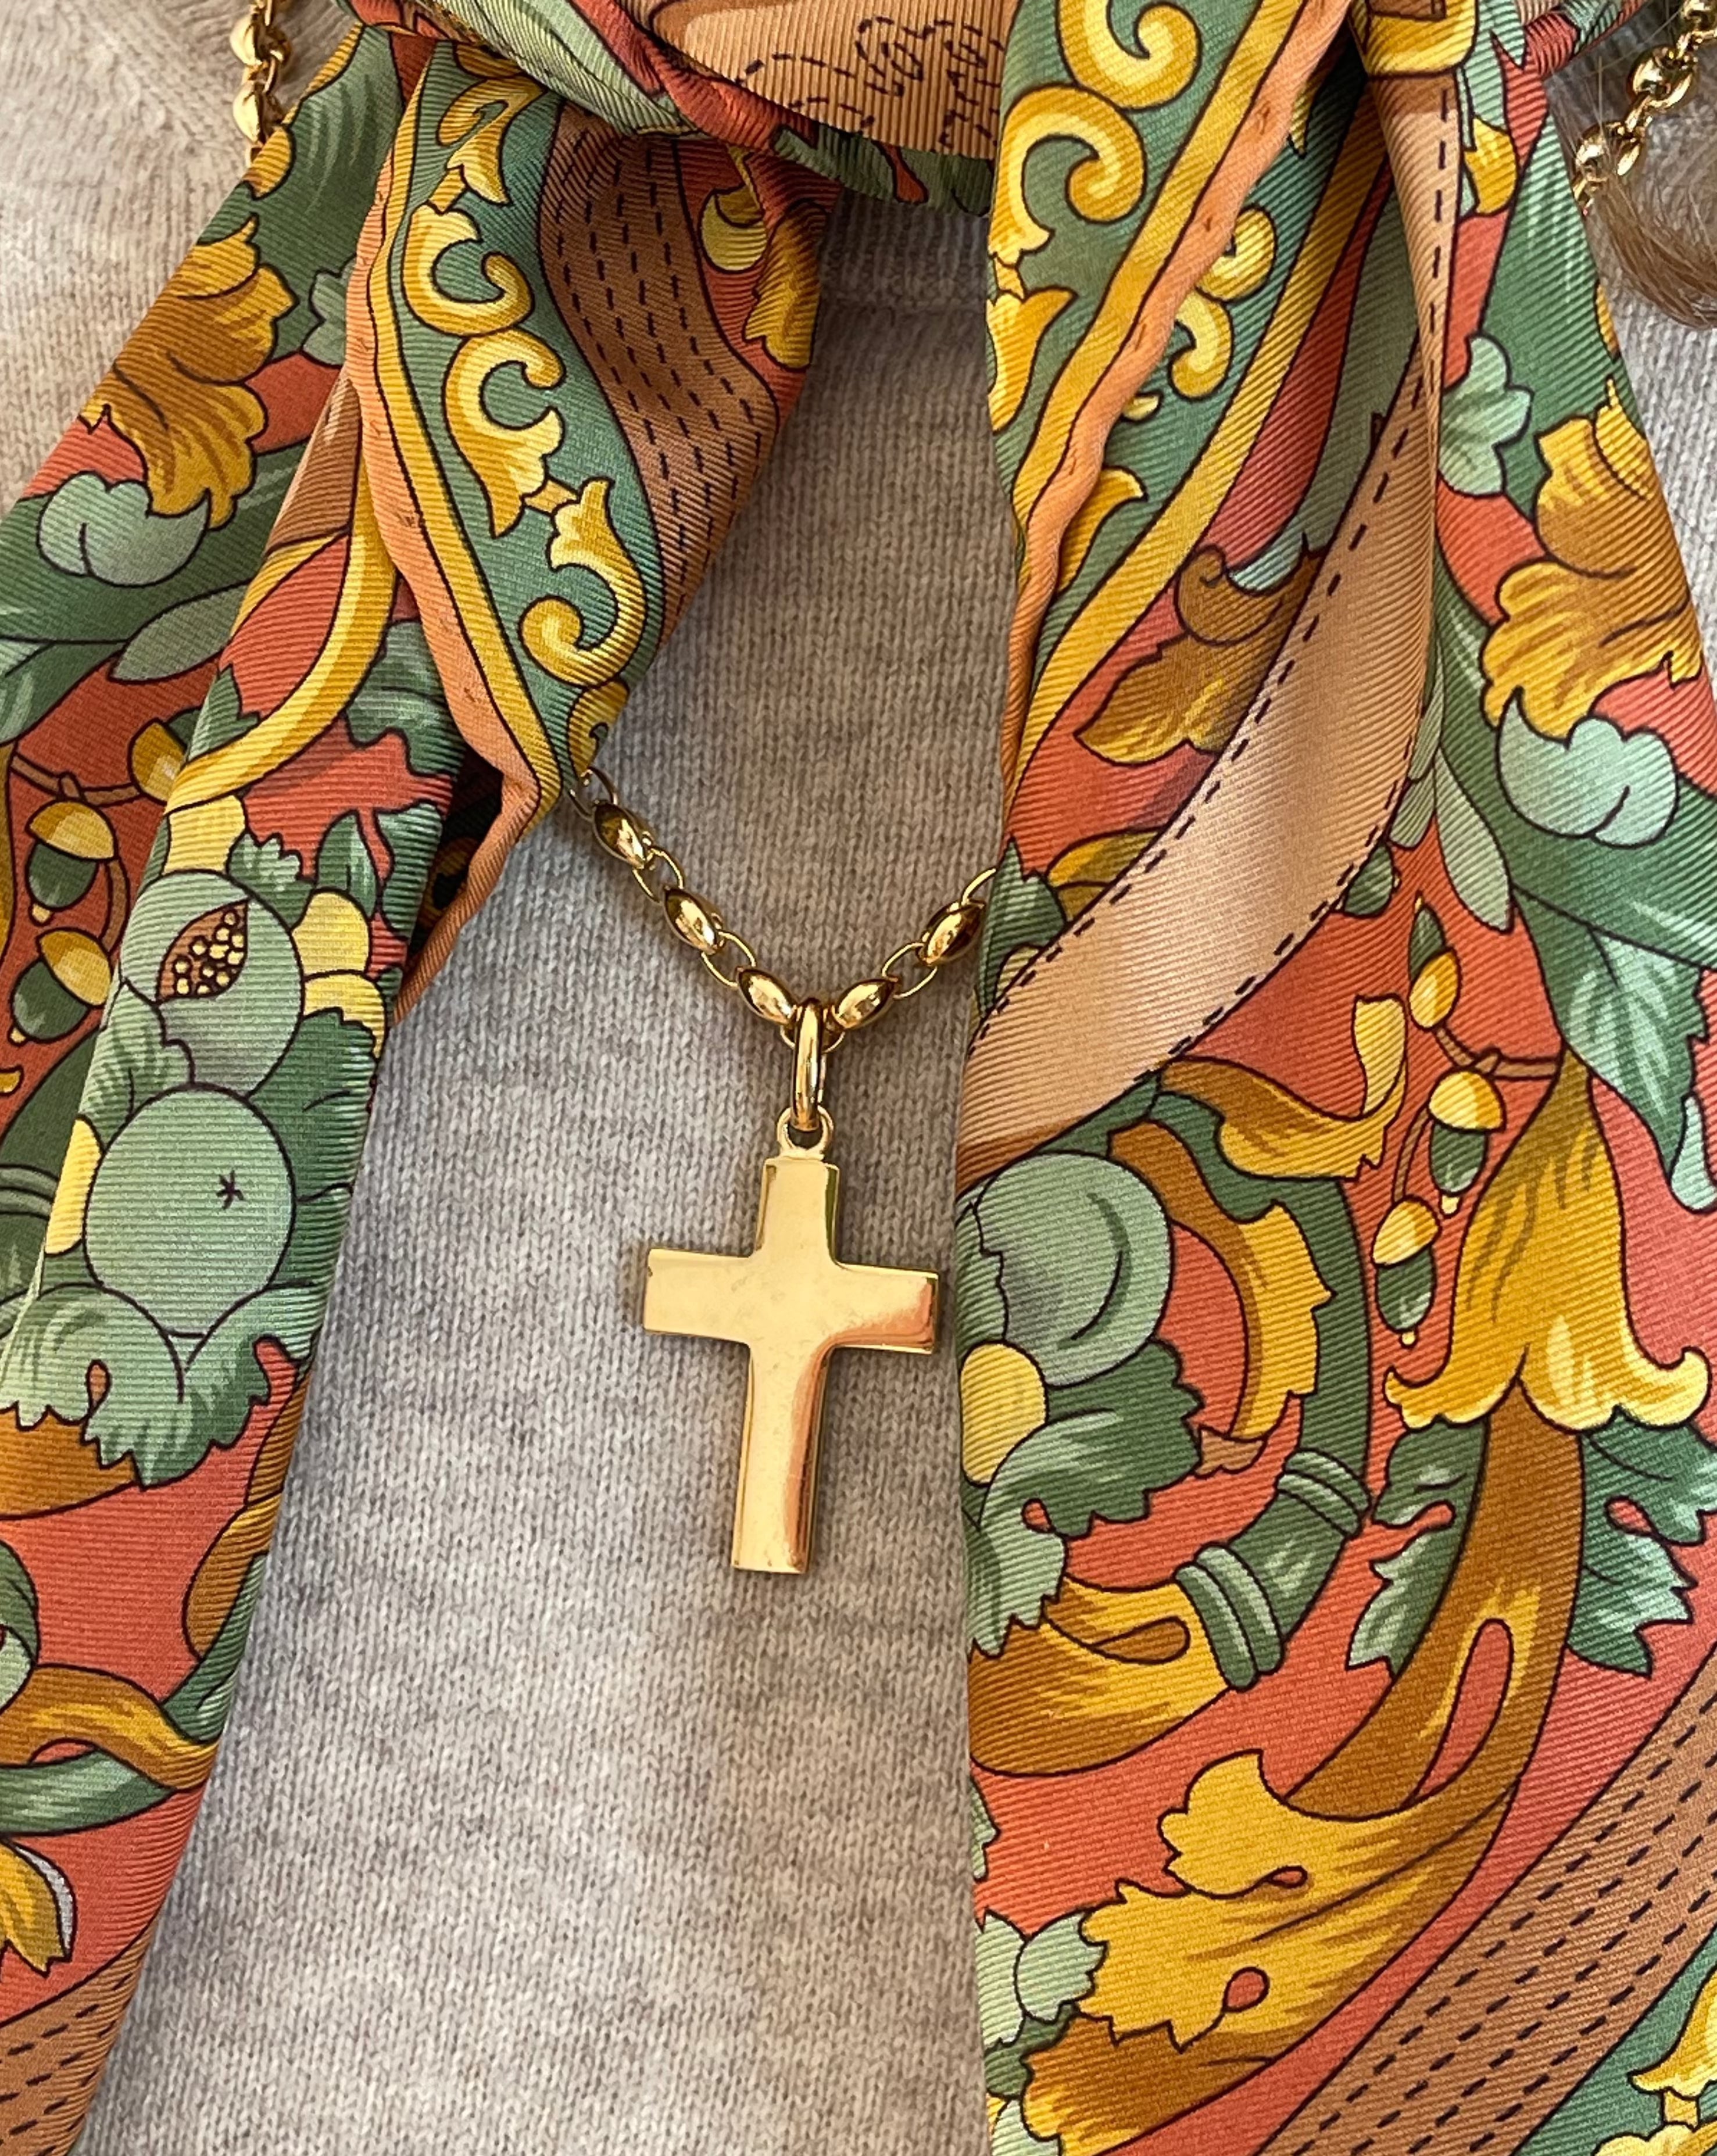 SILVER LATIN CROSS NECKLACE